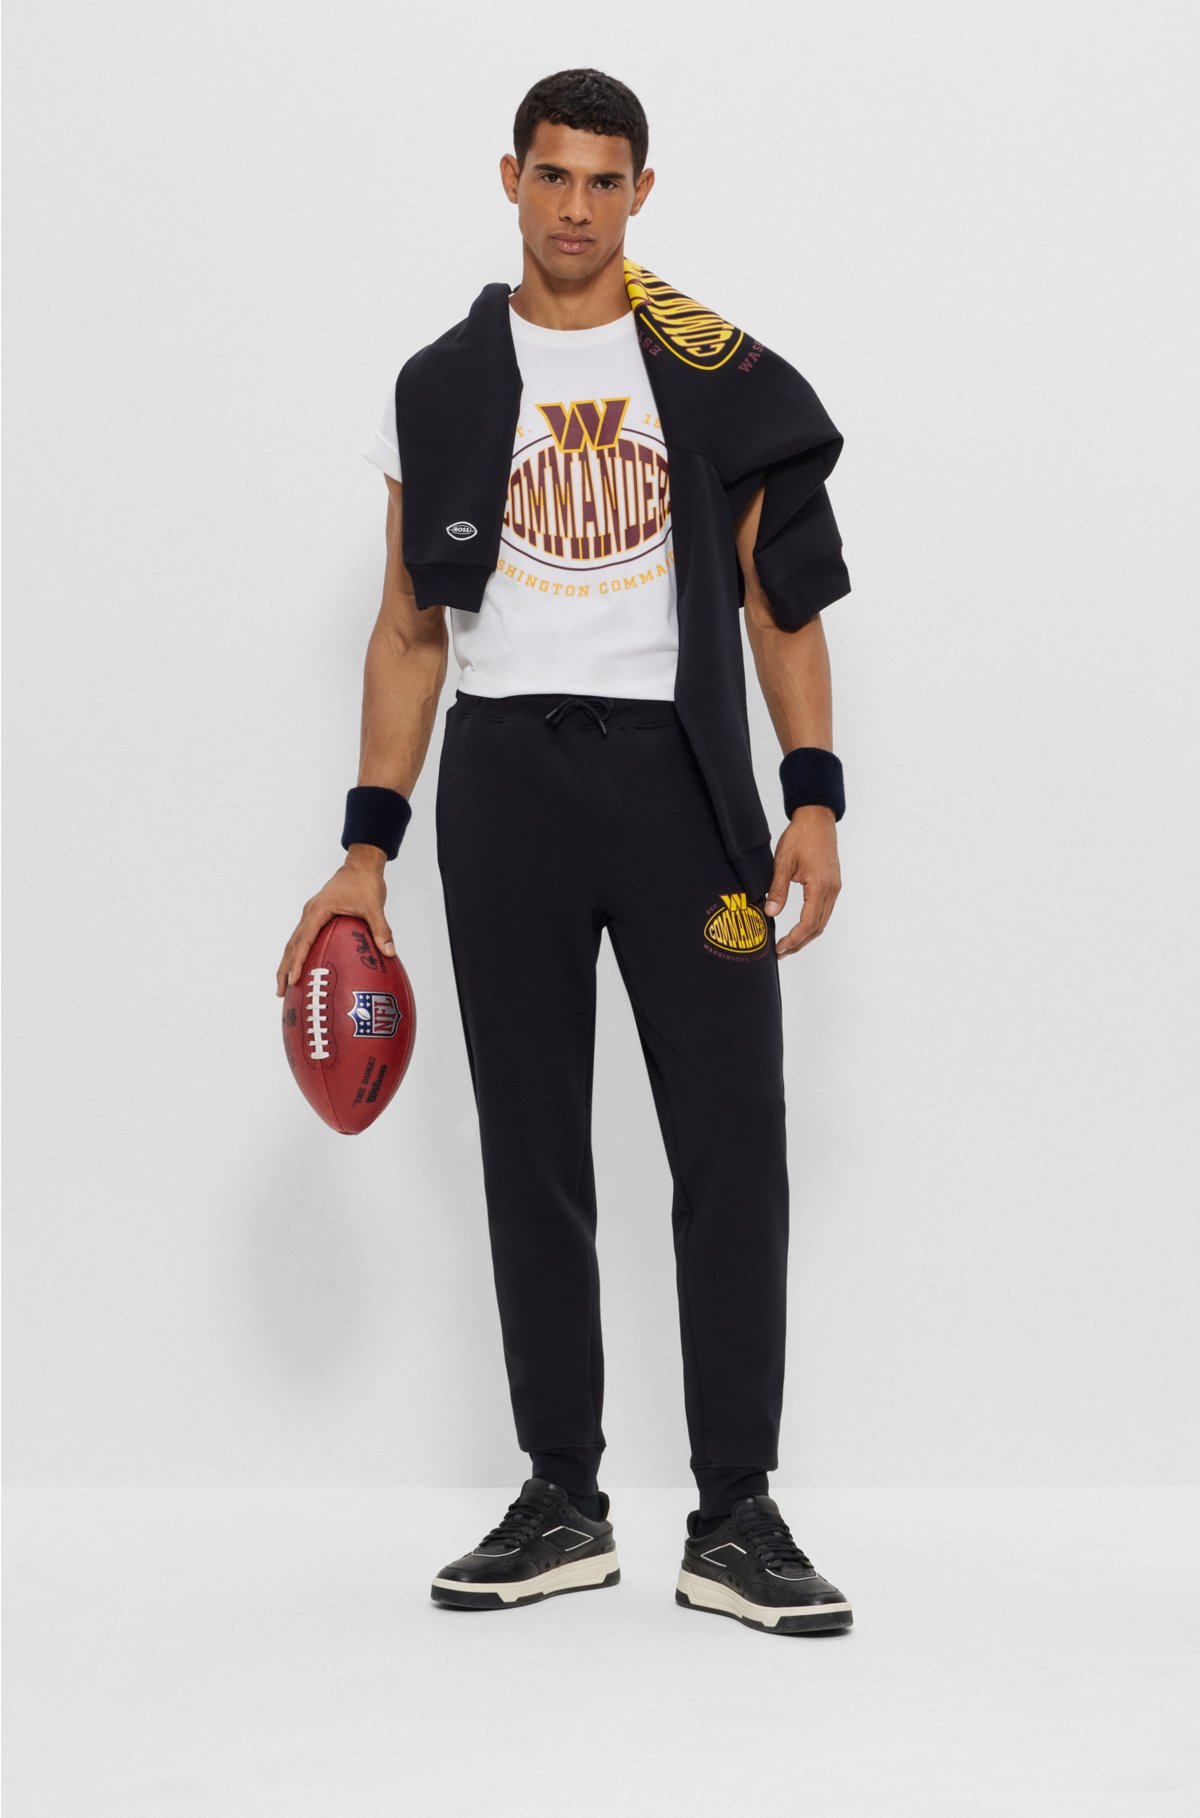 BOSS x NFL cotton-blend tracksuit bottoms with collaborative branding, Commanders